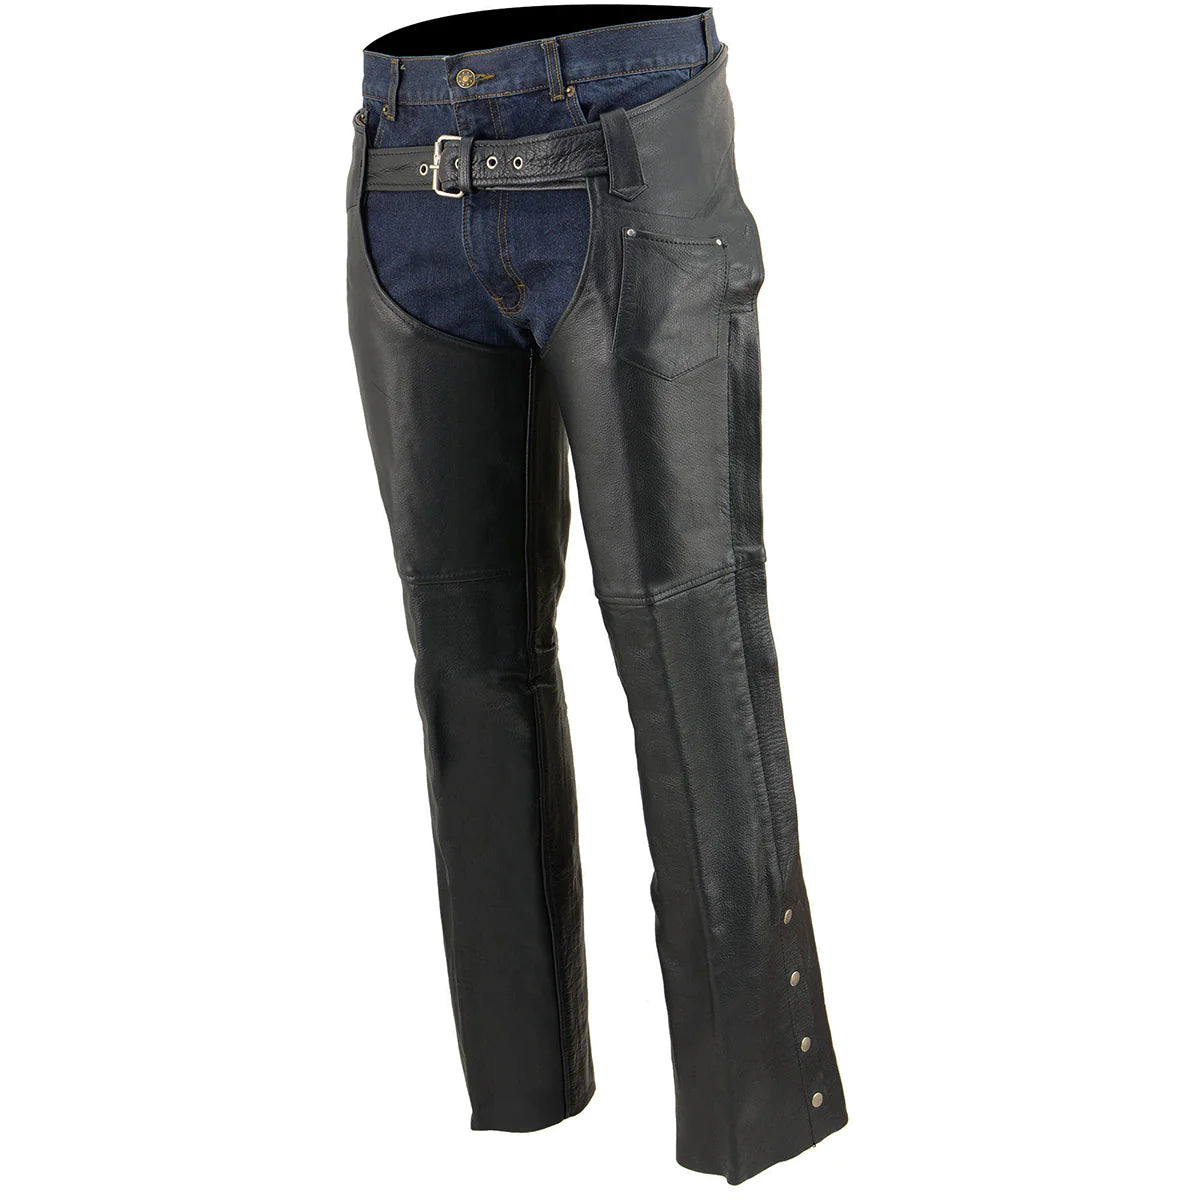 Men's Black Classic Fully Lined Leather Chaps